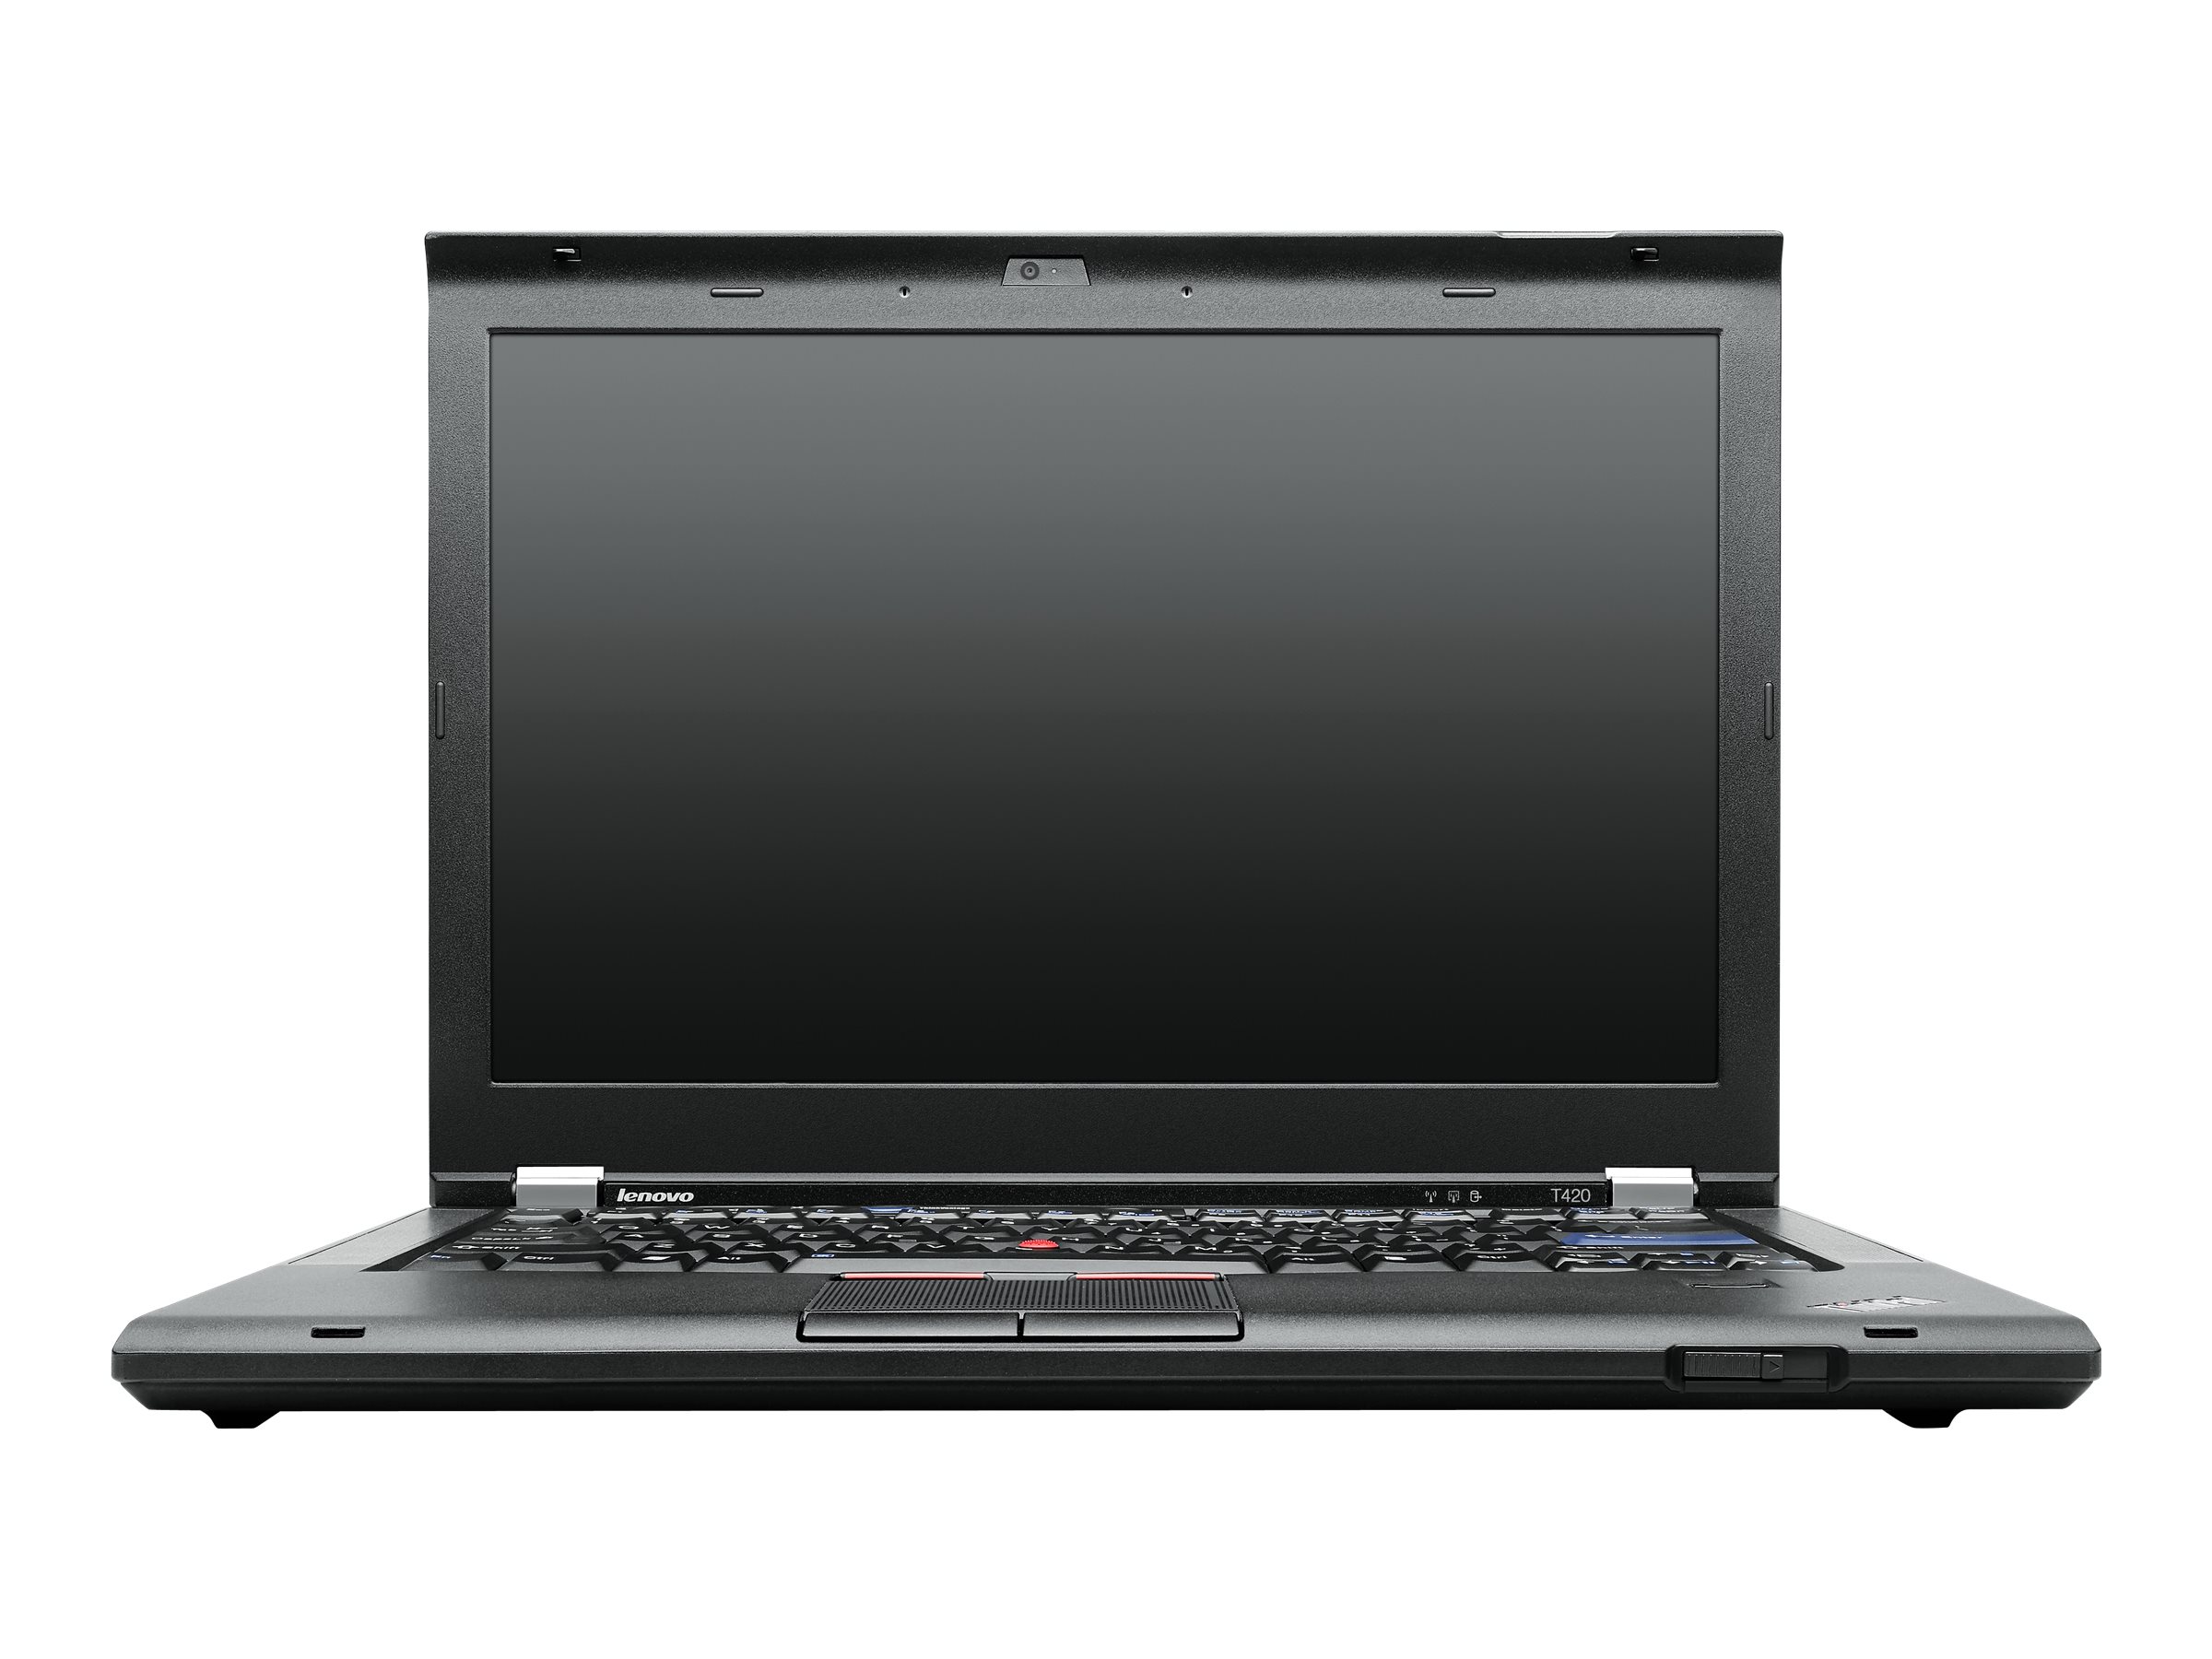 Lenovo ThinkPad T420si (4171) - full specs, details and review